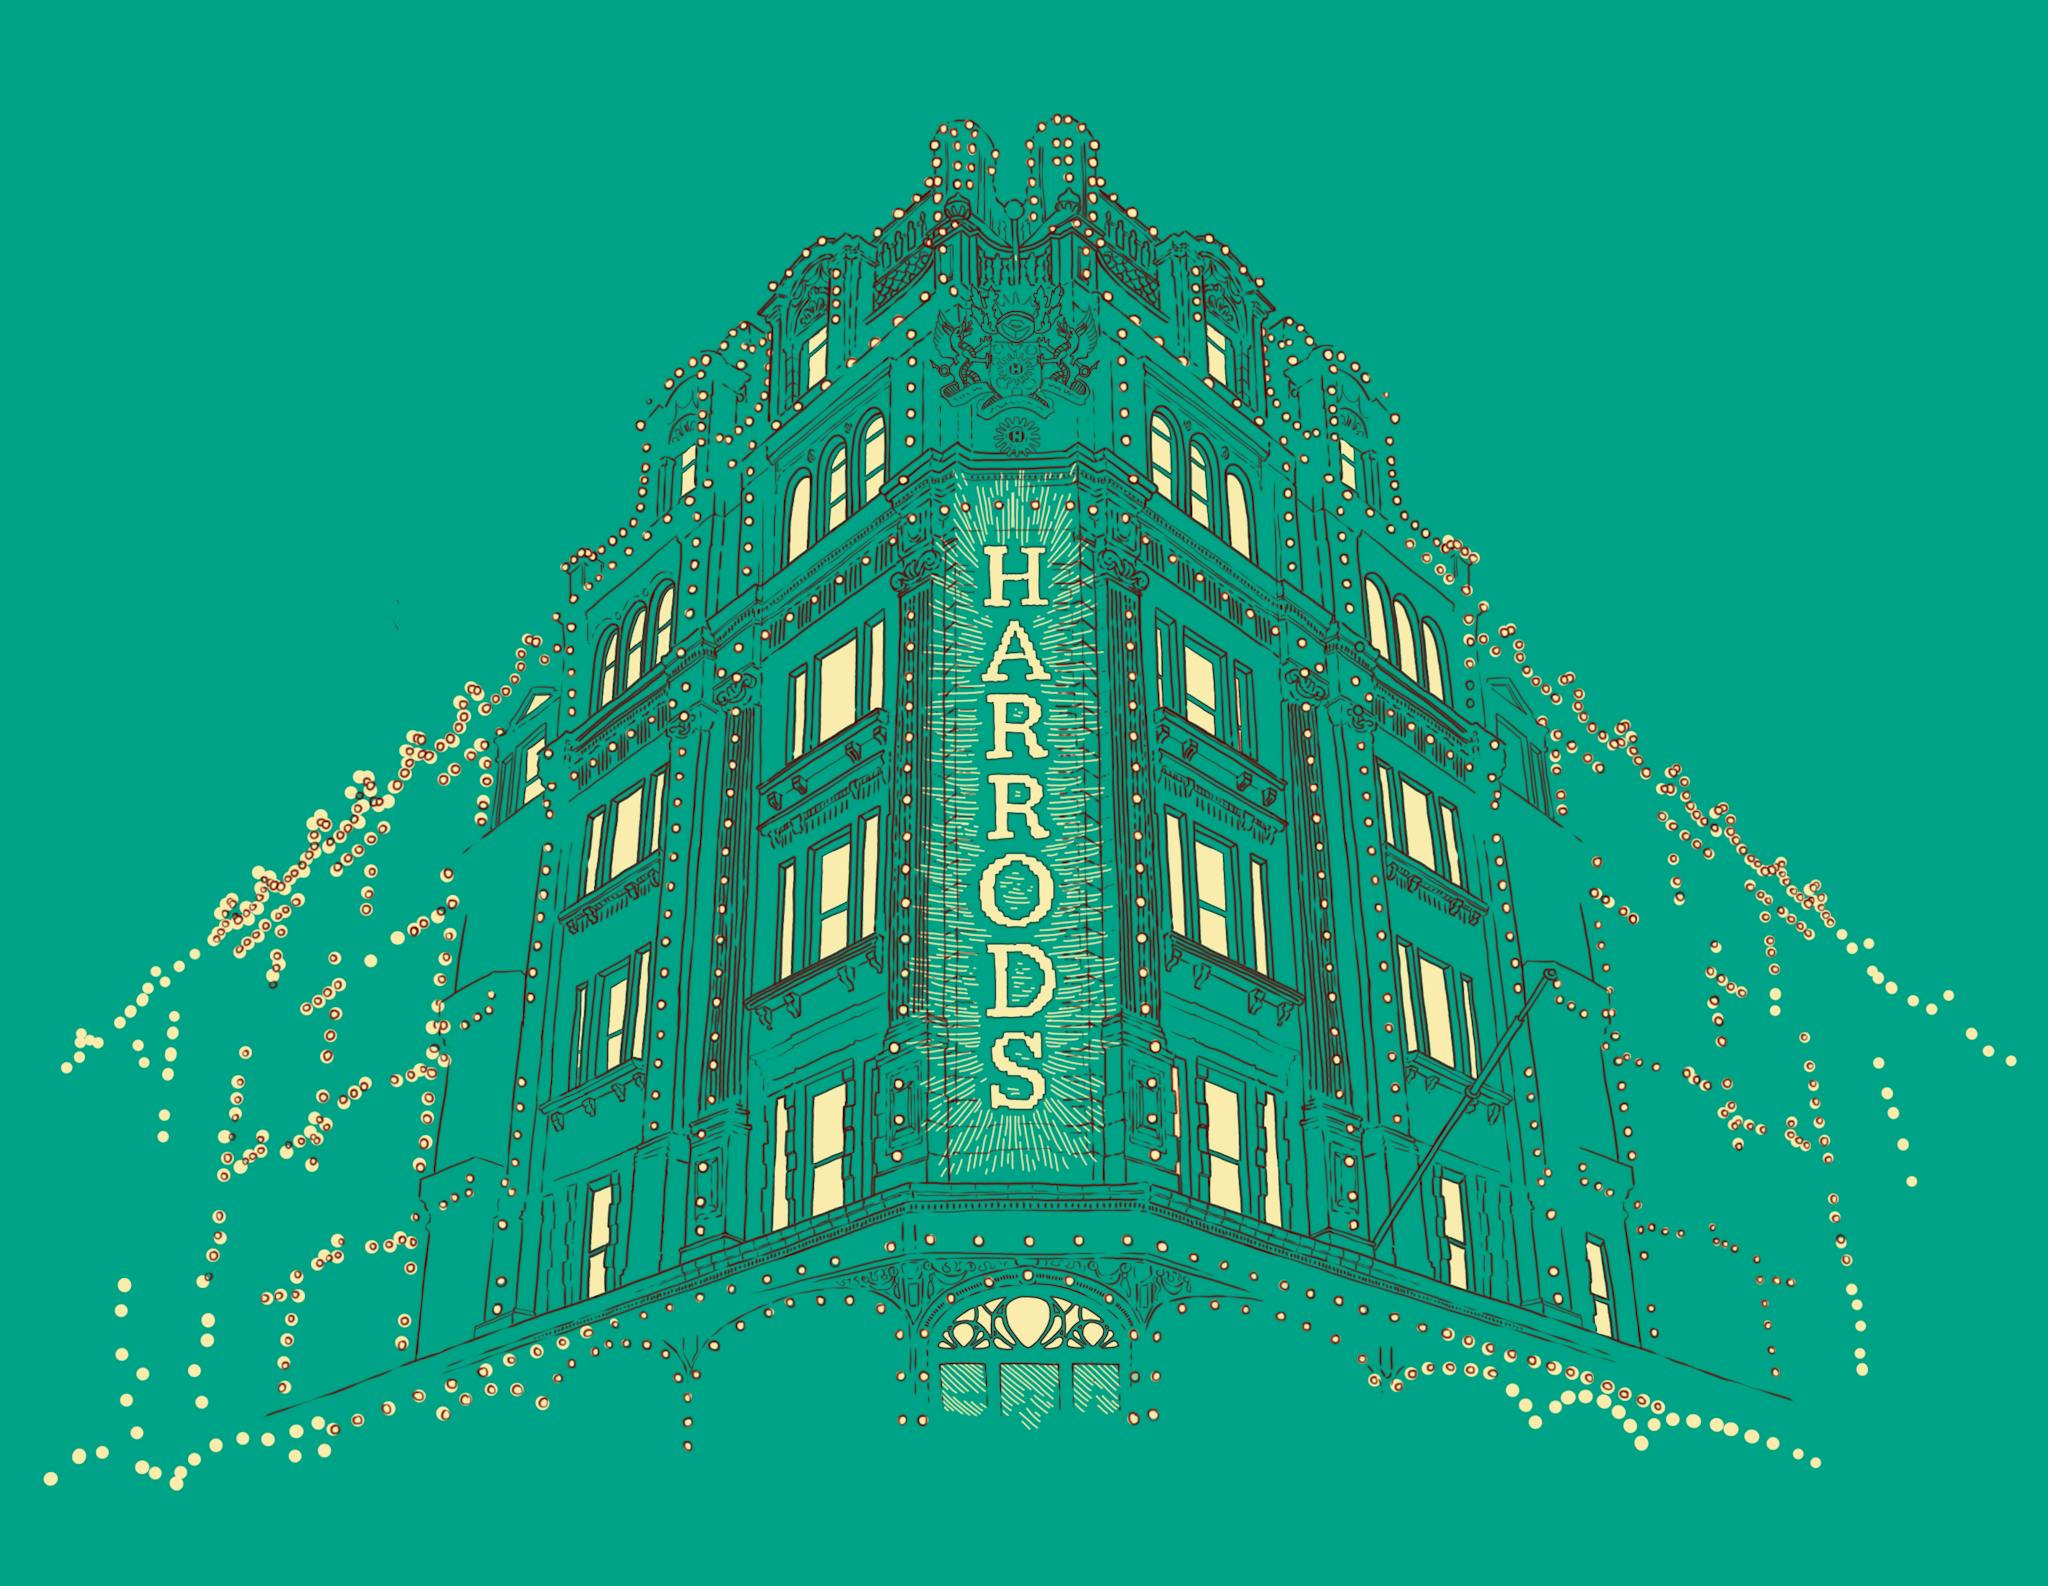 Harrods illustrated in red lines on a green background with yellow lights